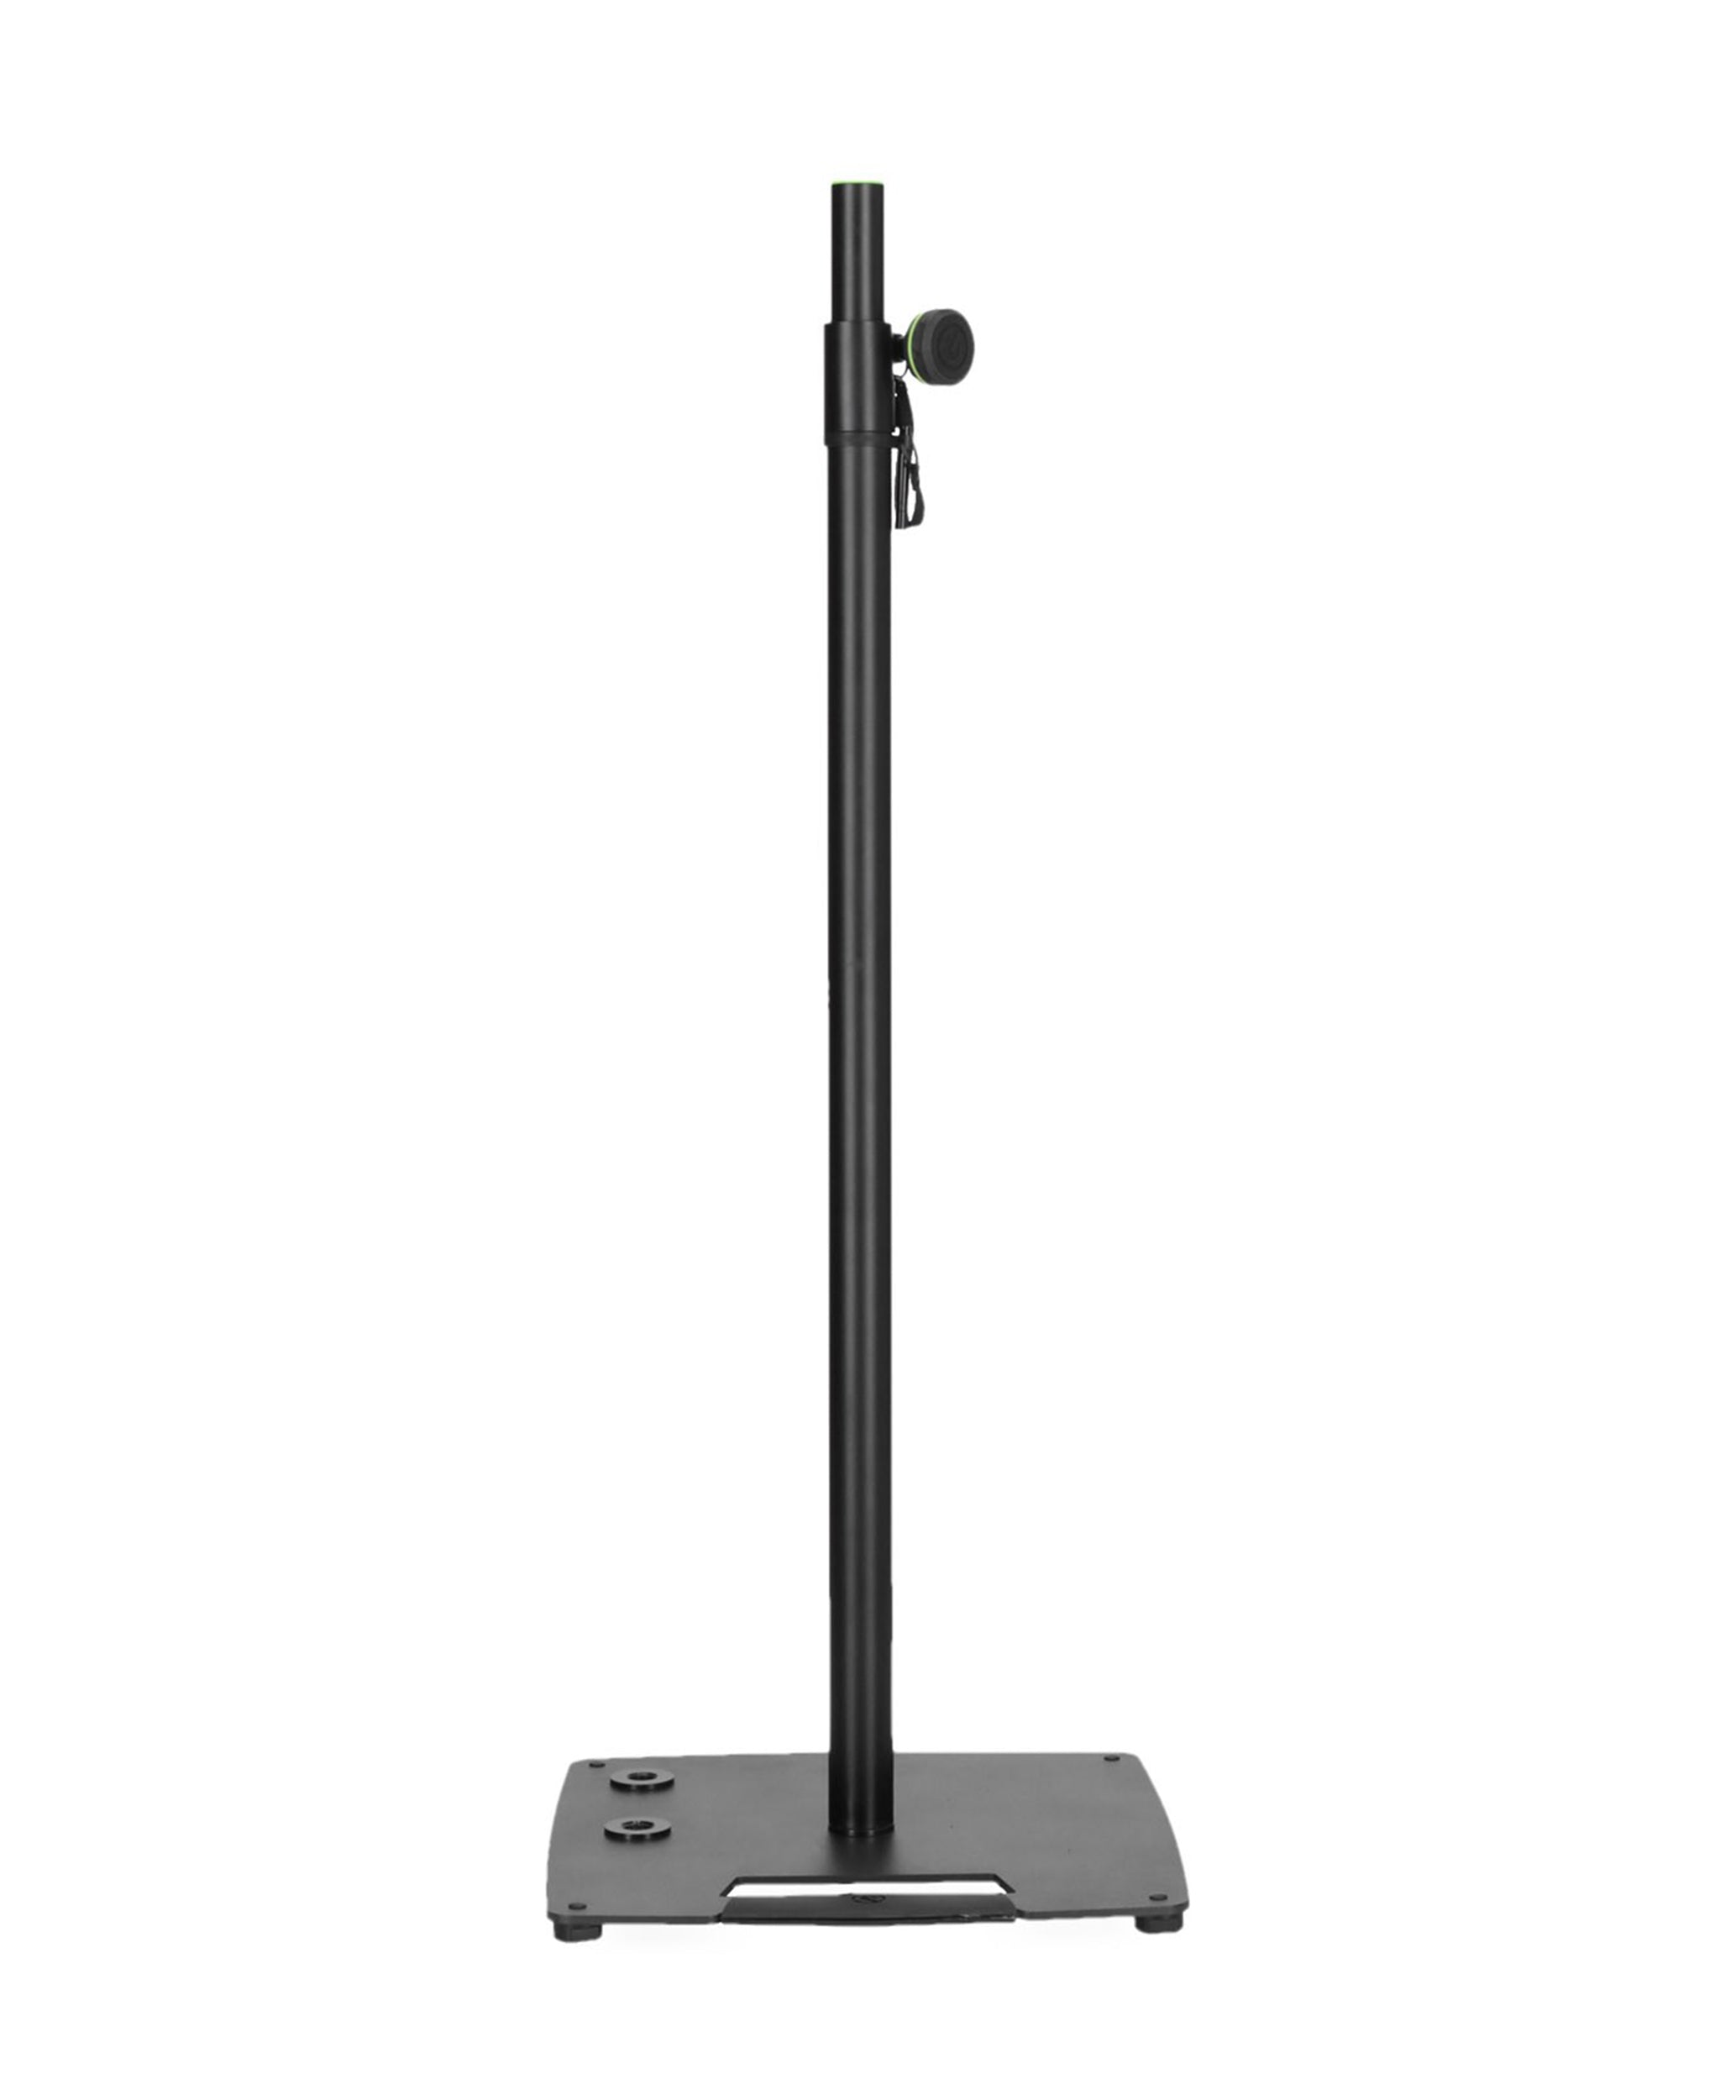 B-Stock: Gravity LS 431 C B, Lighting Stand and Speaker Stand with Compact Square Steel Base by Gravity